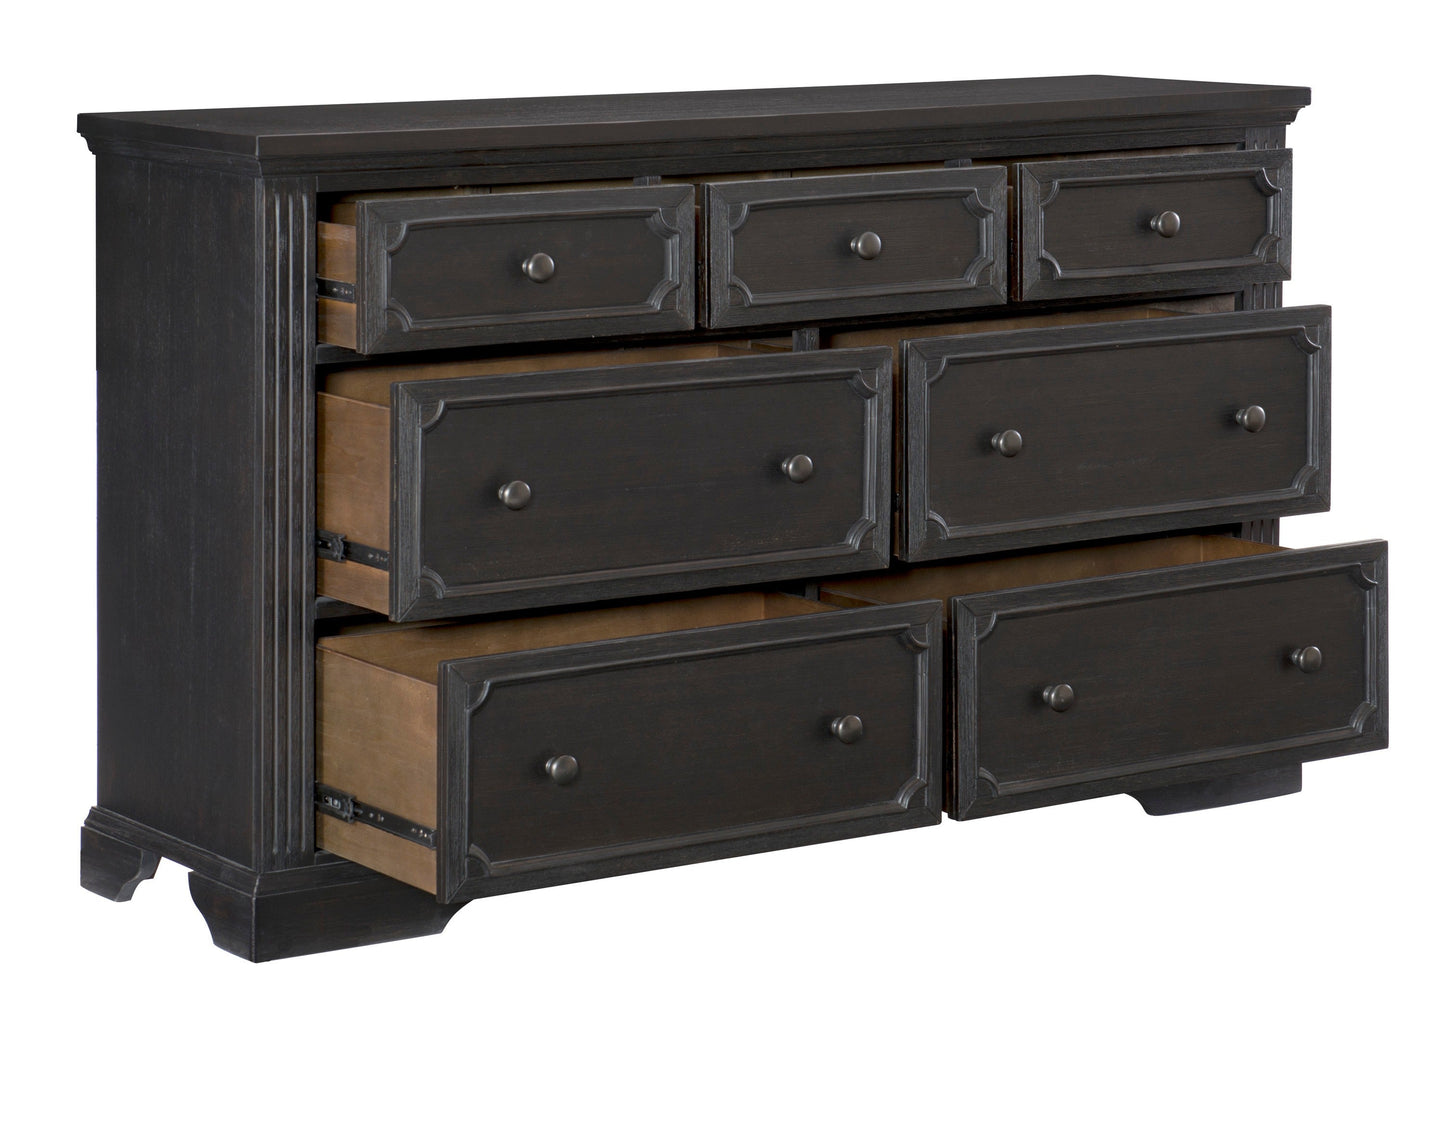 Bolingbrook Wire-Brushed Charcoal Dresser